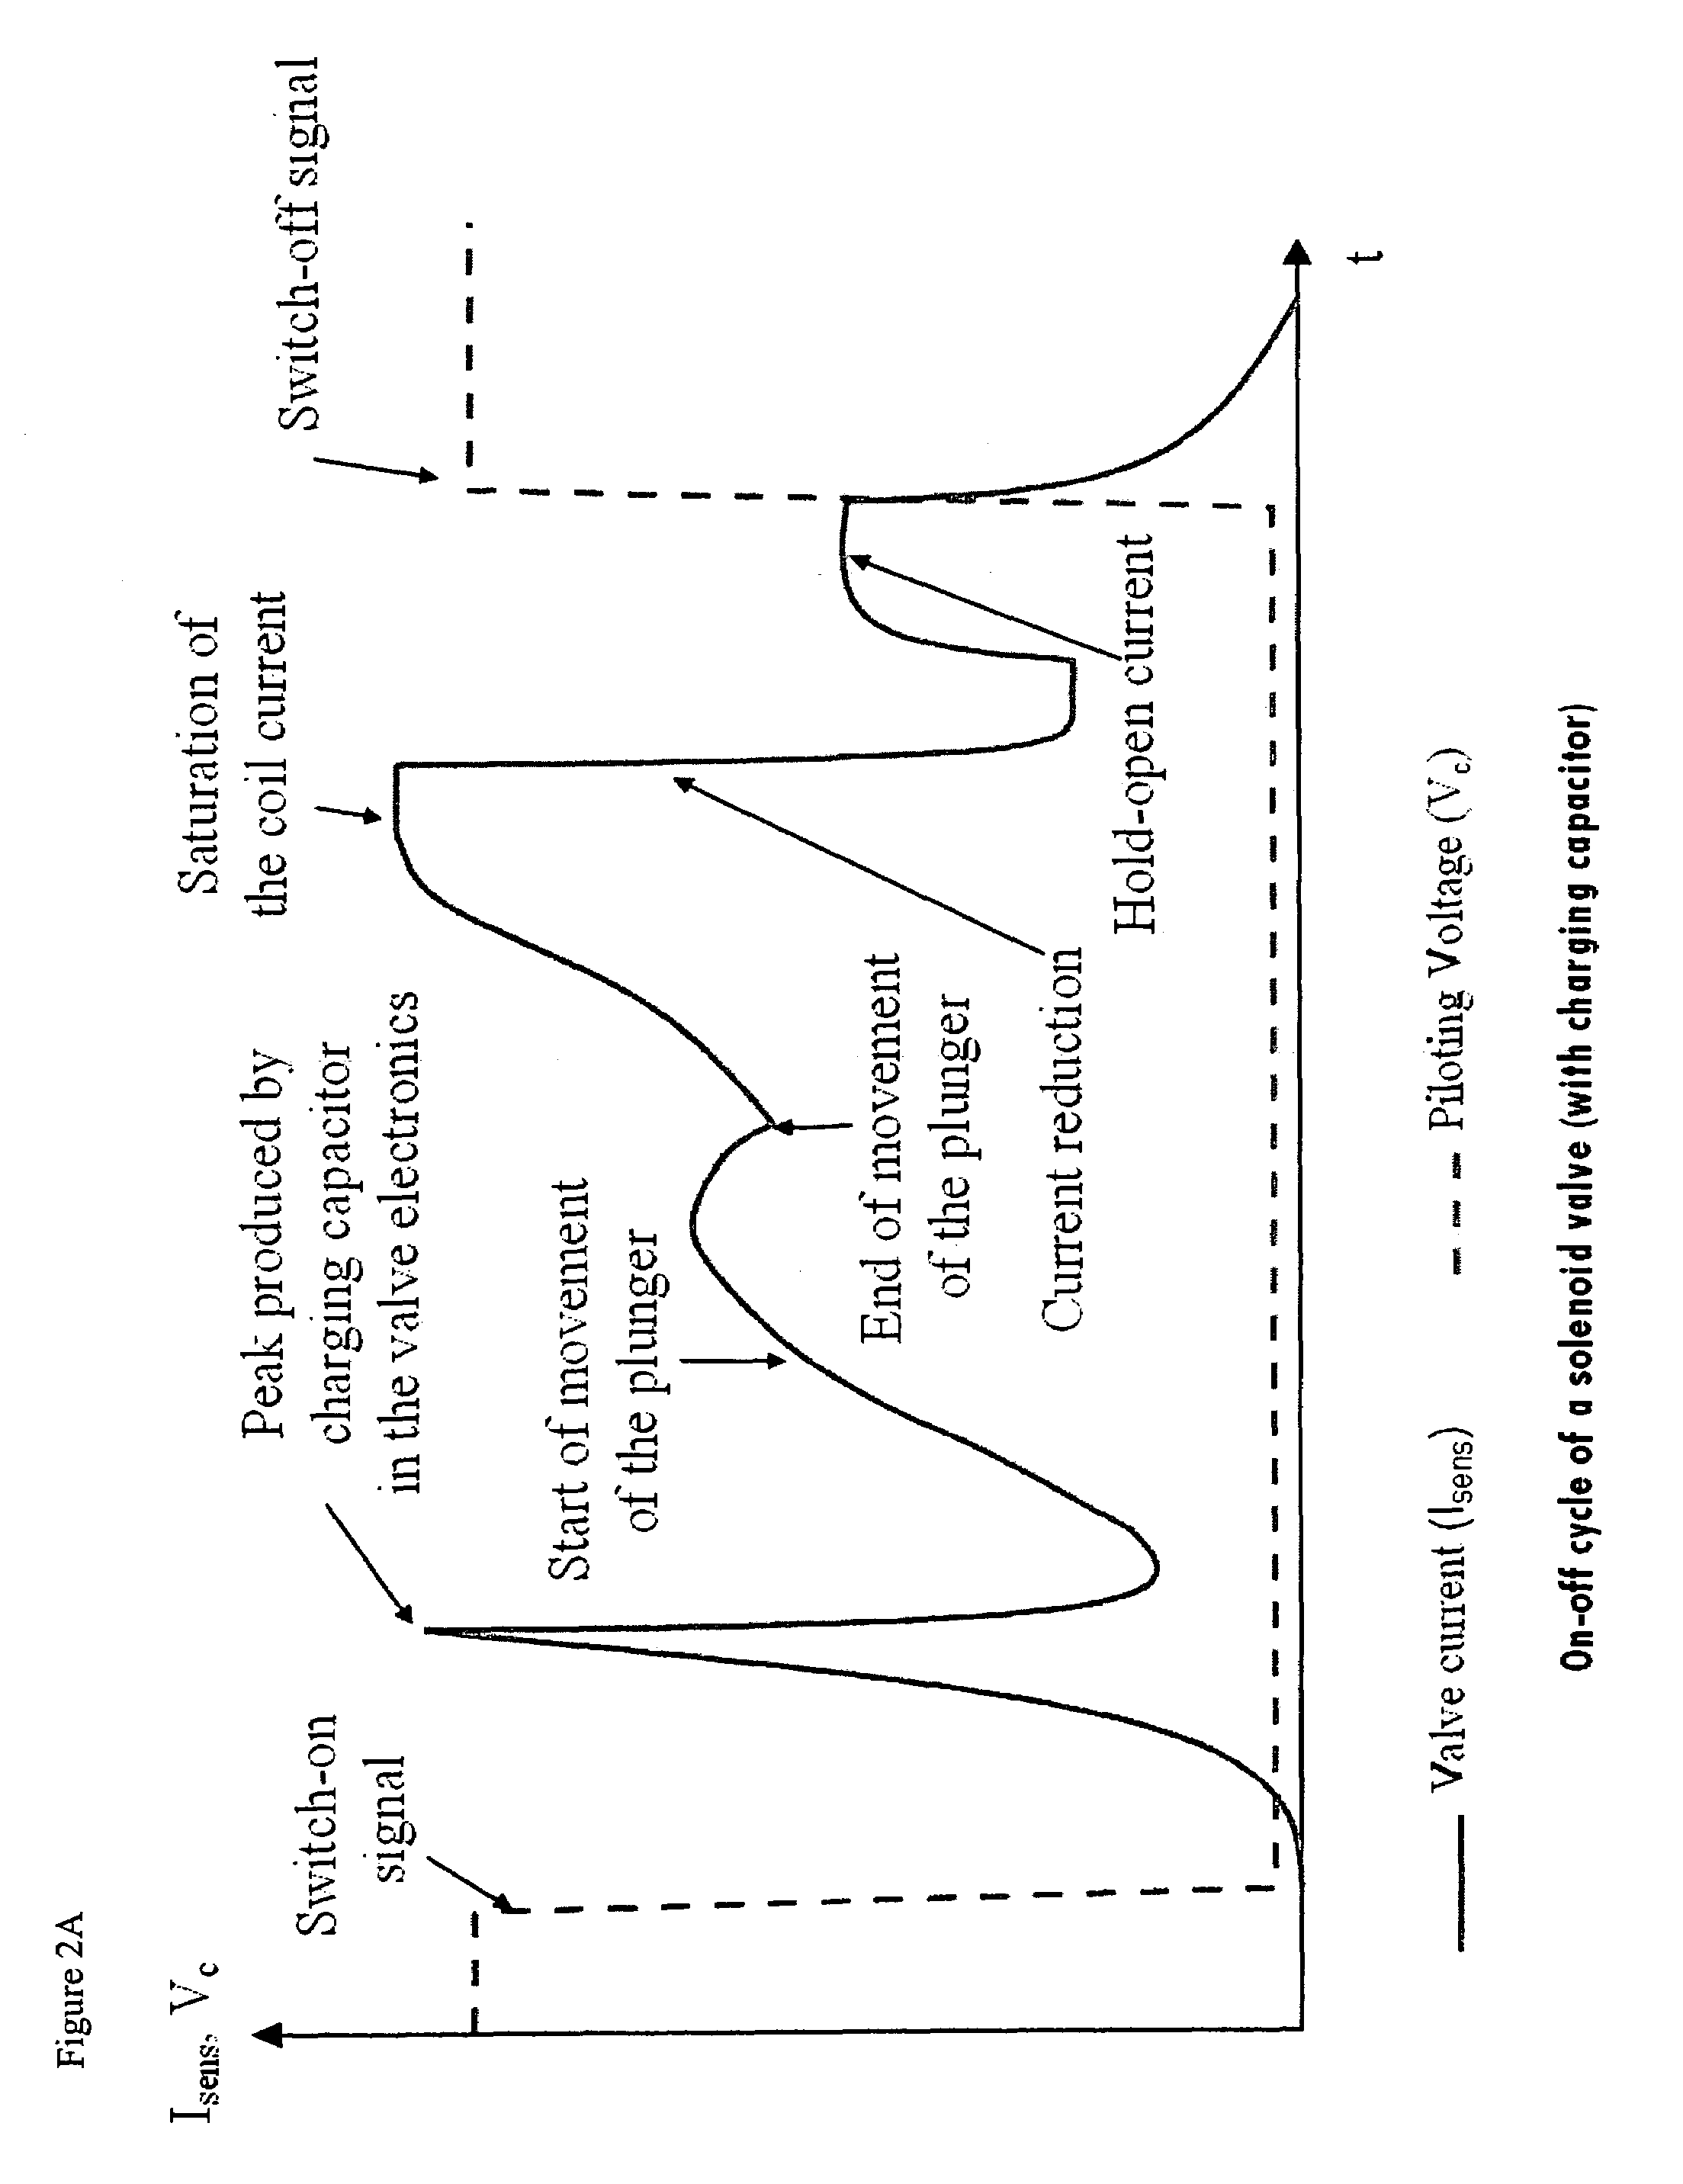 Method and apparatus for monitoring and determining the functional status of an electromagnetic valve